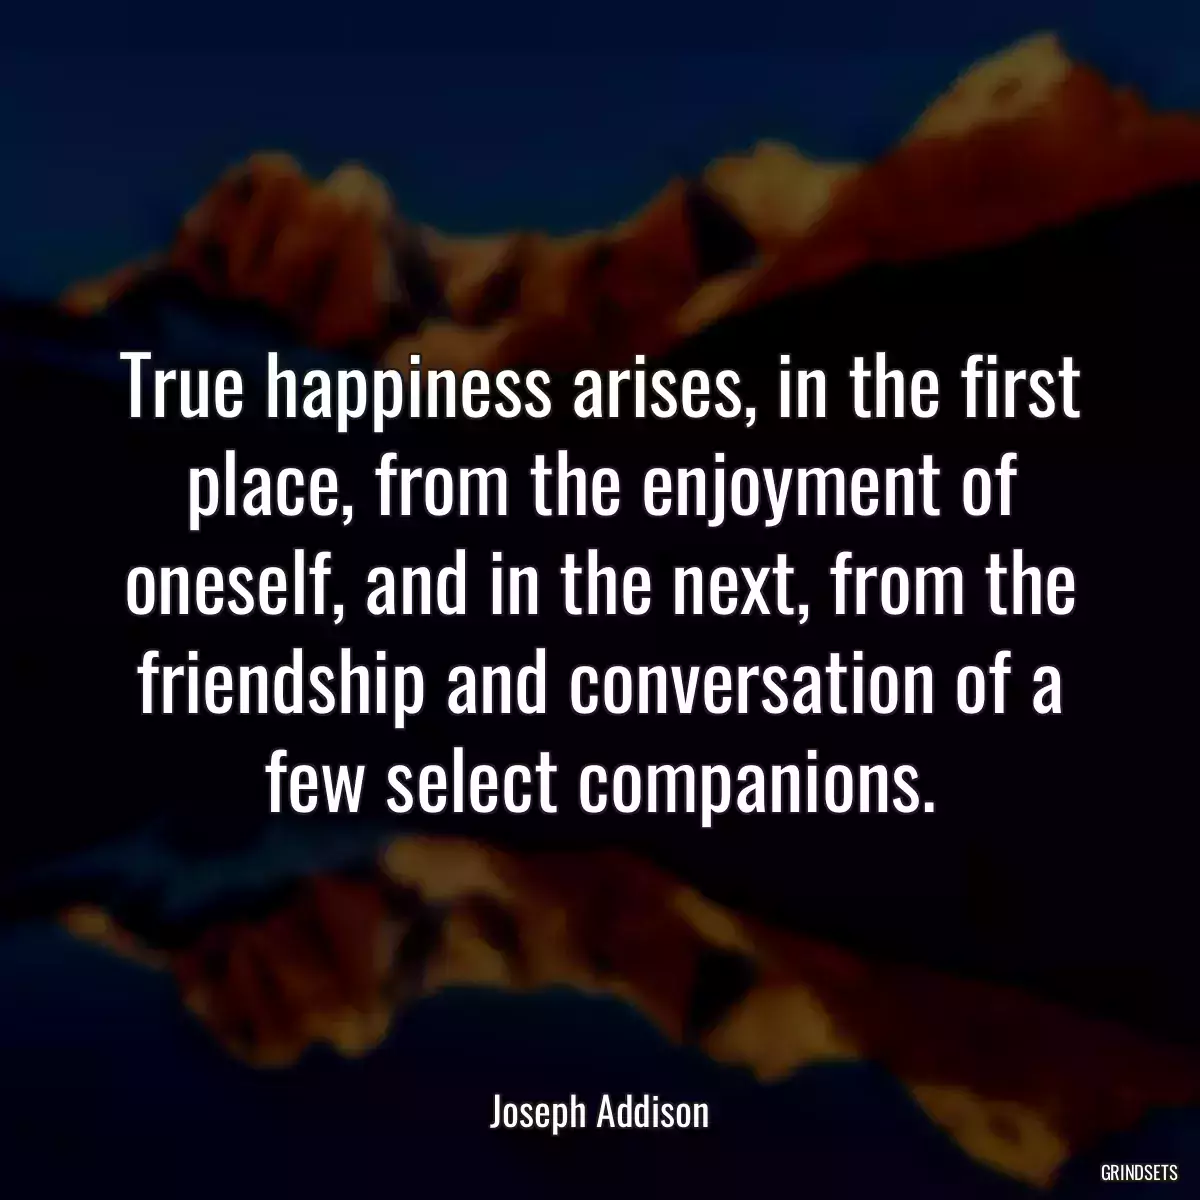 True happiness arises, in the first place, from the enjoyment of oneself, and in the next, from the friendship and conversation of a few select companions.